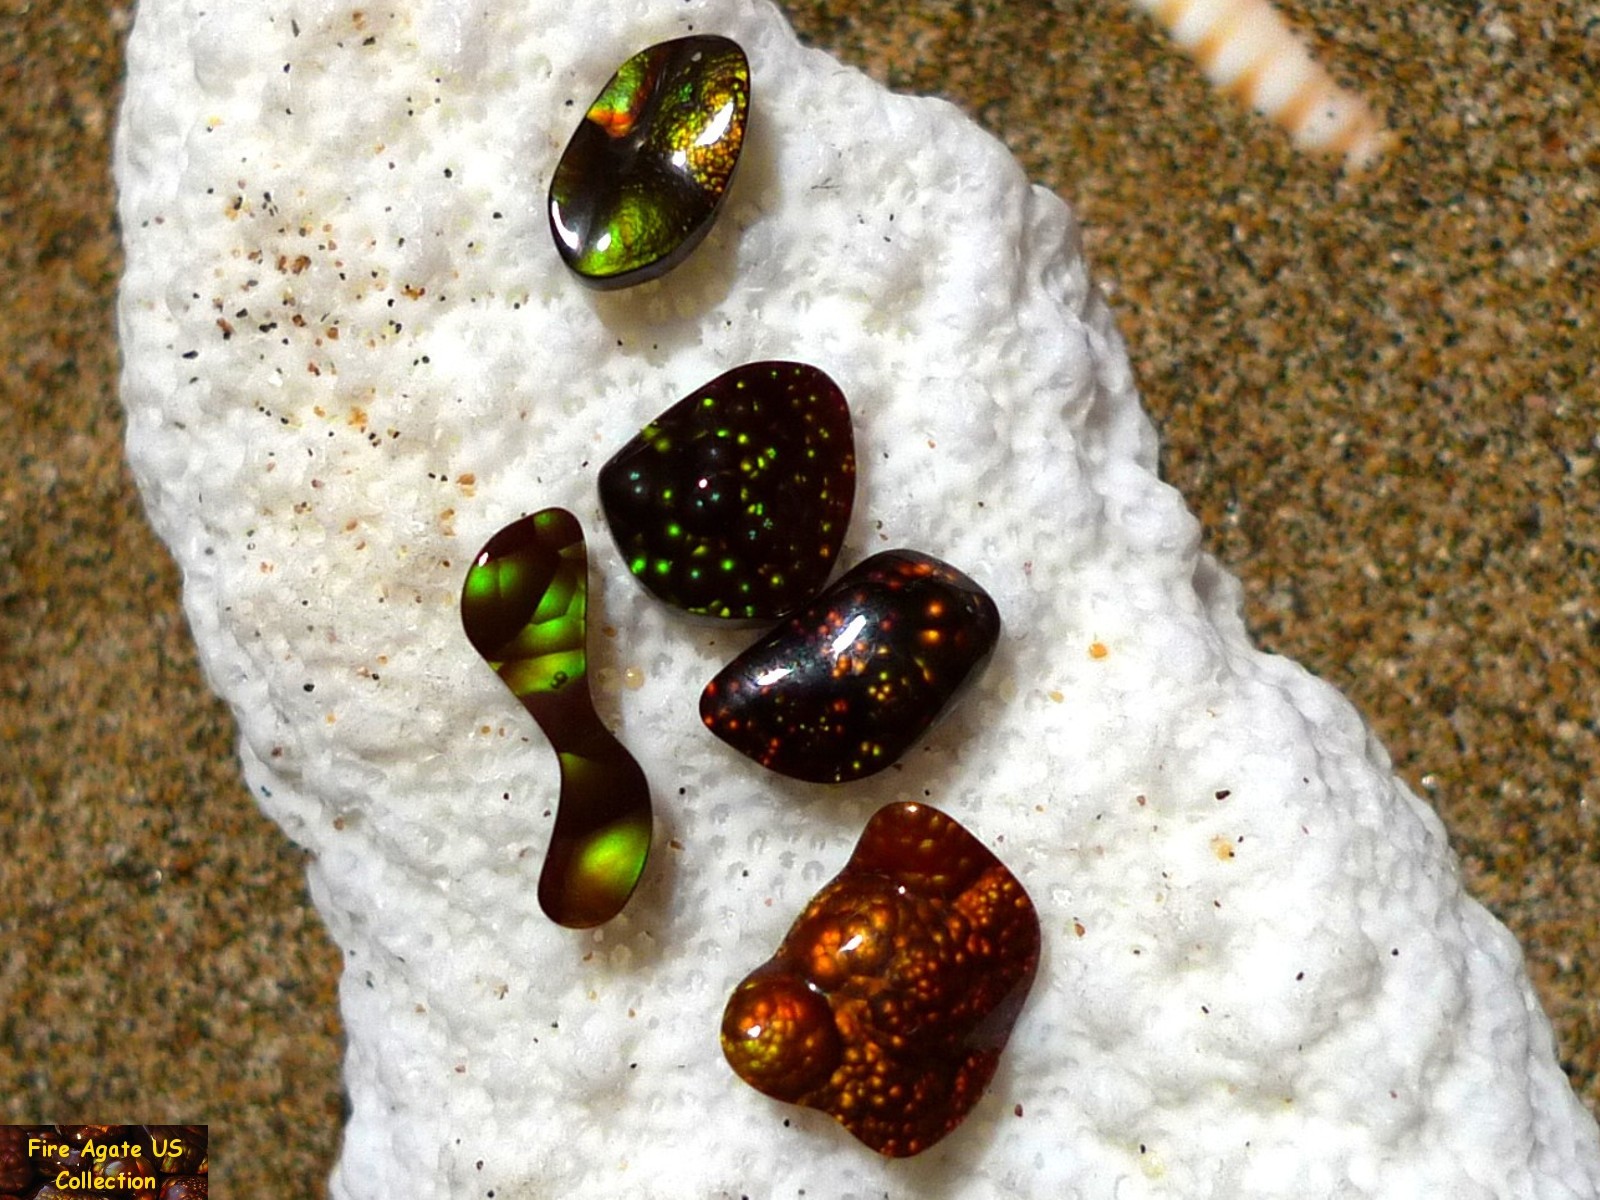 Group of Five Fire Agate Cabochons 4.6 Total Carat Weight Deer Creek Slaughter Mountain Arizona Gems SLG068 Photo 10